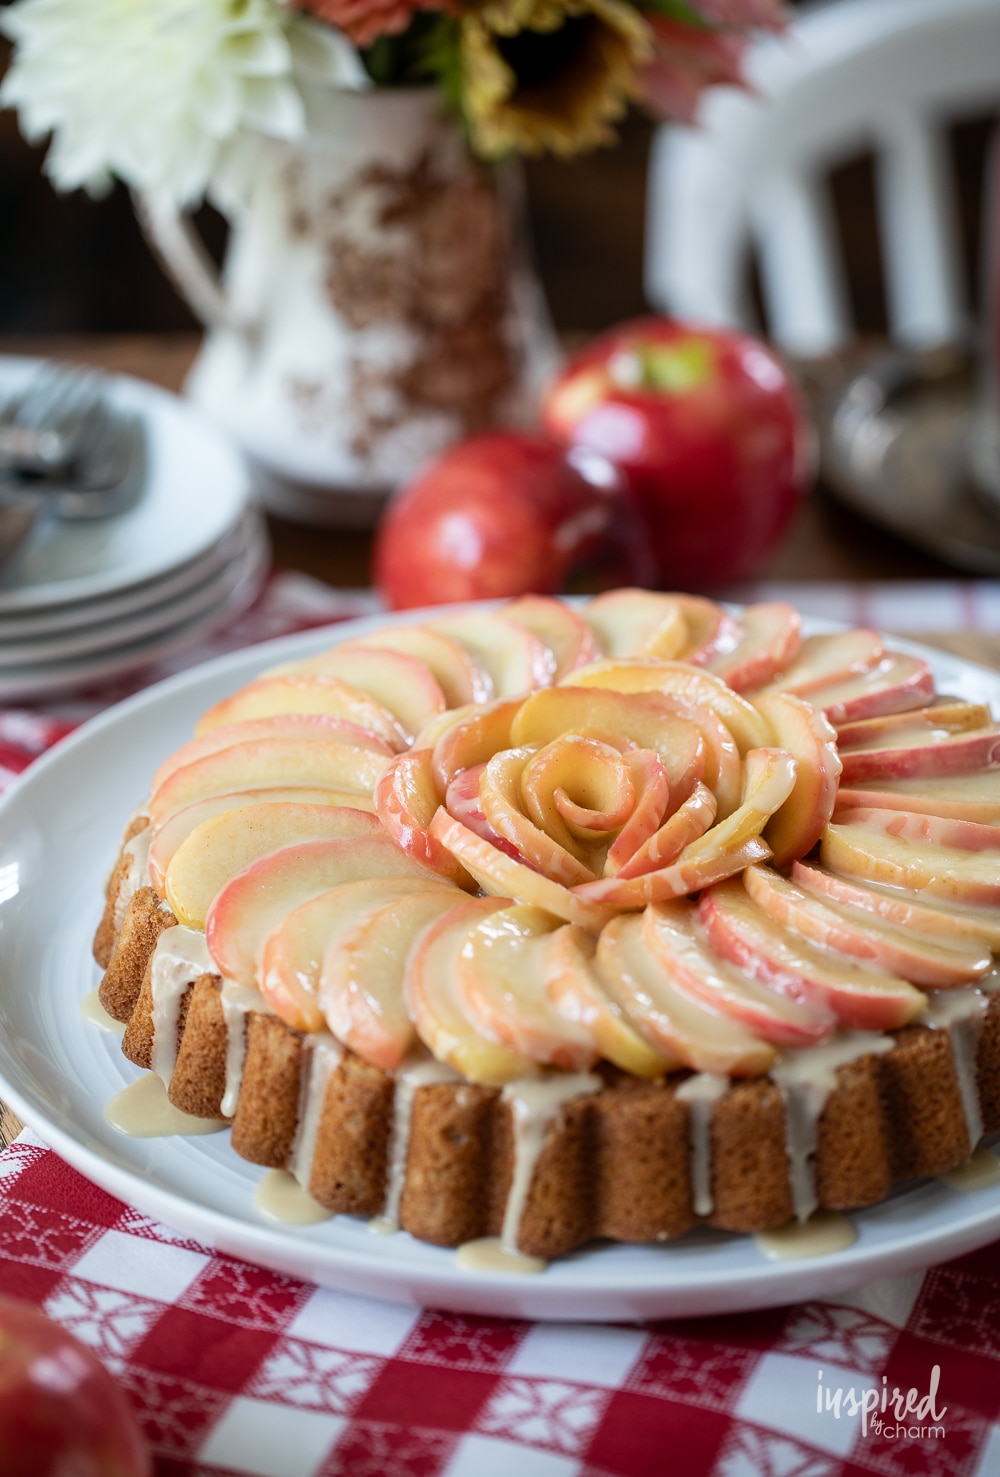 cake with fresh apple slices swirled on the top.